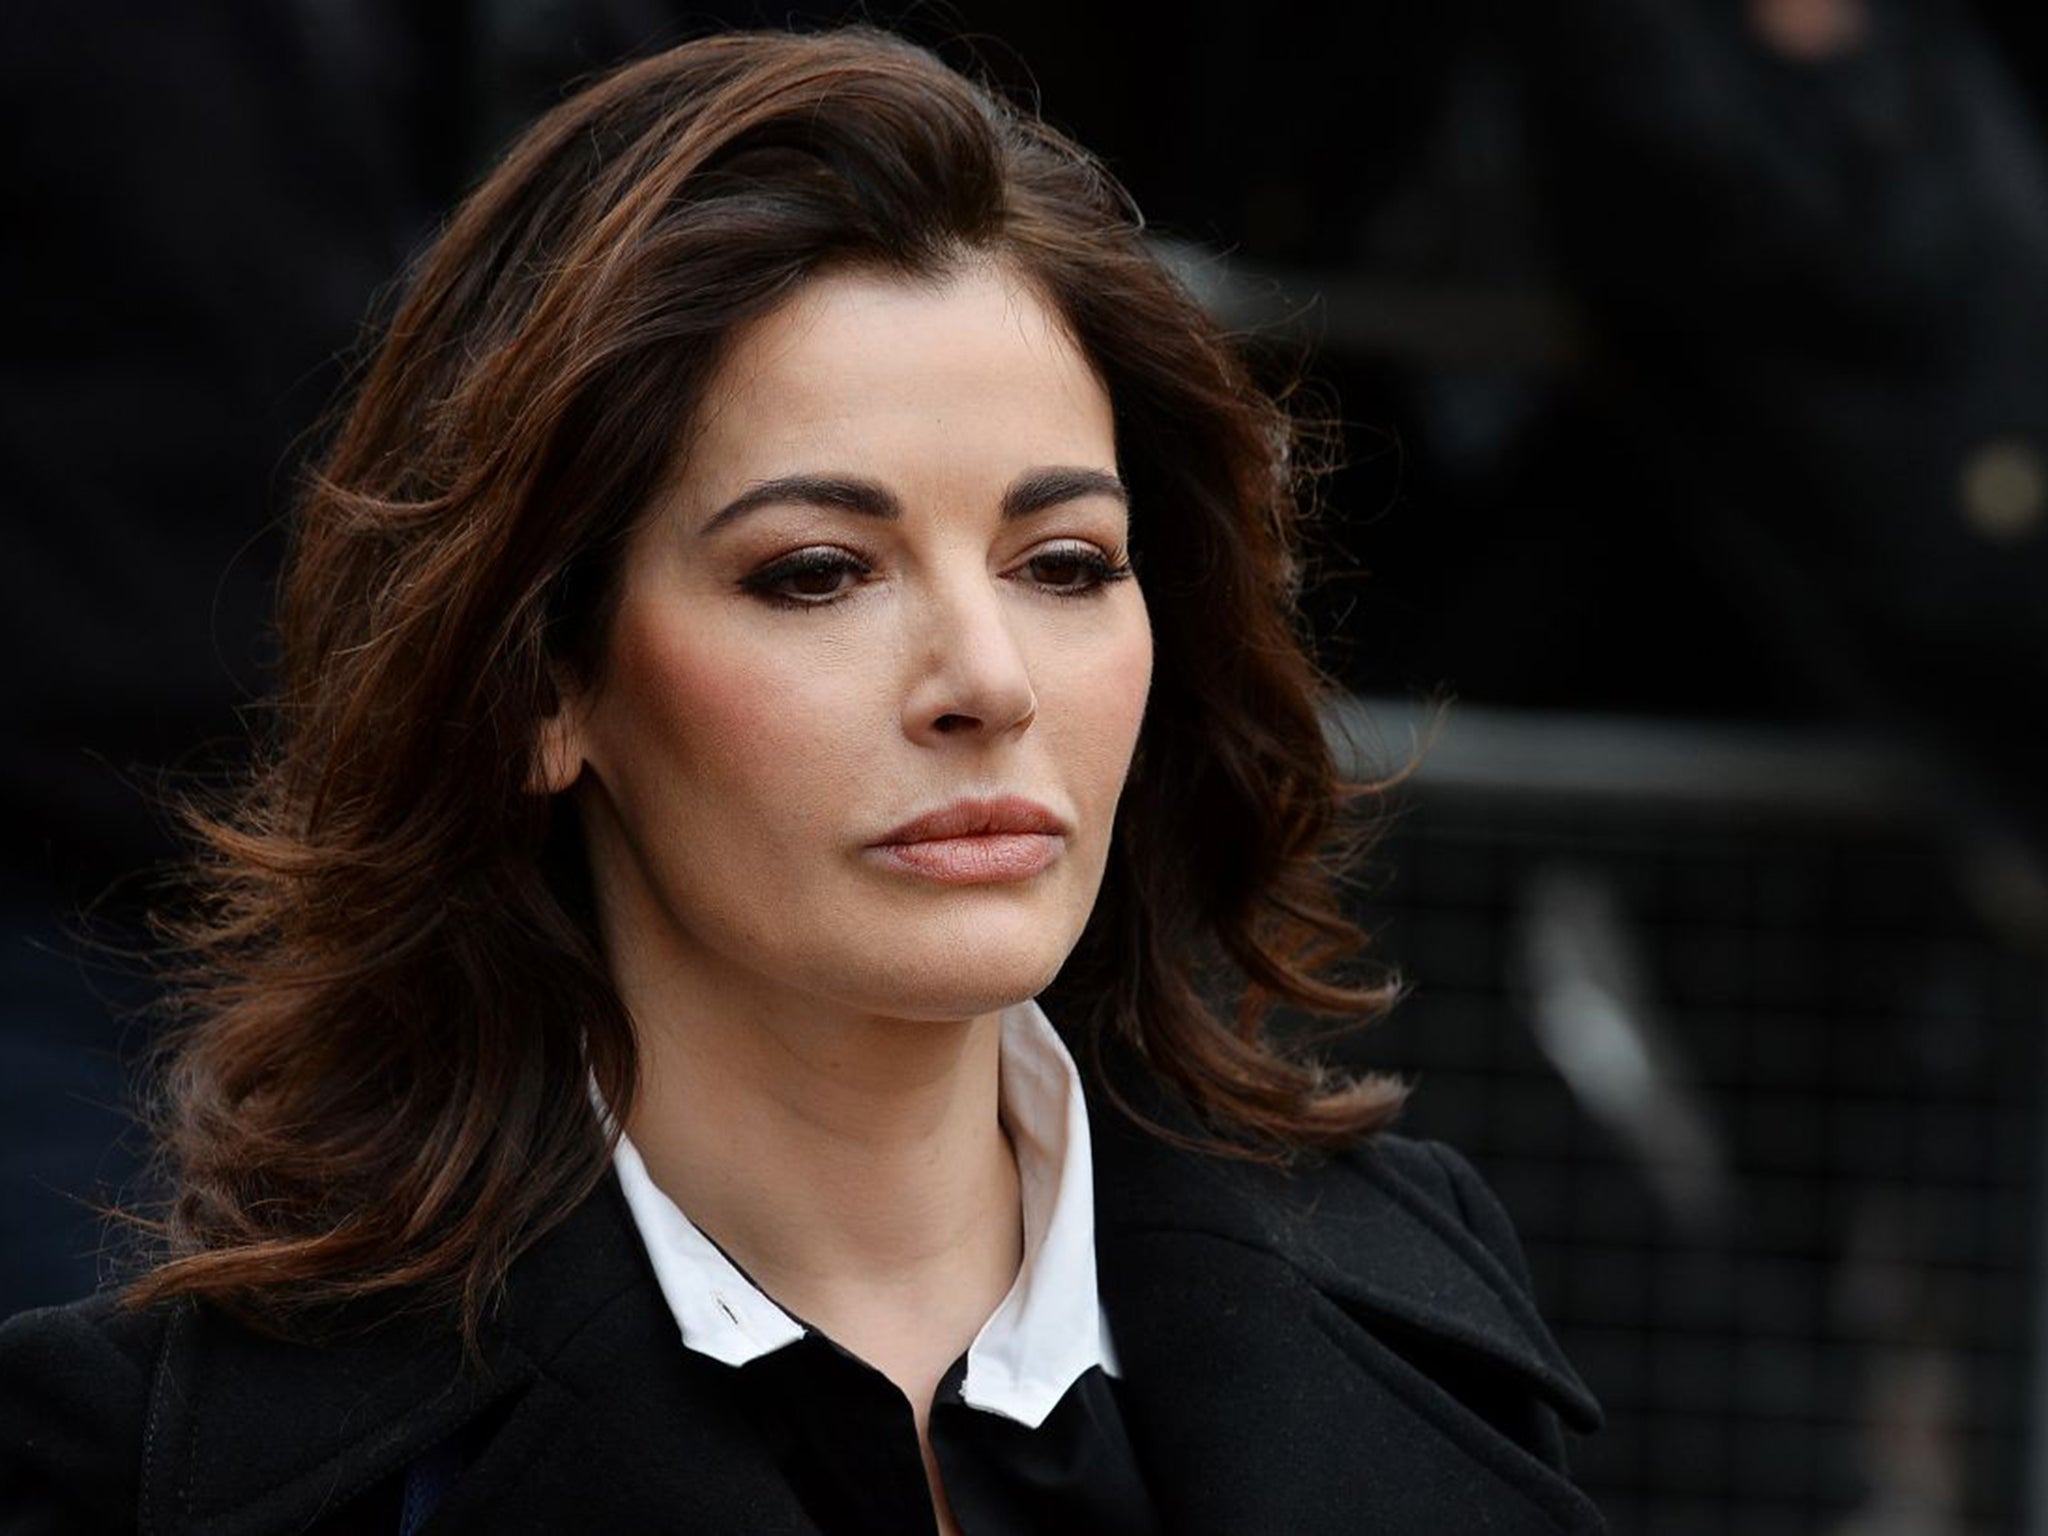 Nigella Lawson faced questions on drug-taking in the trial of former personal assistants (AFP/Getty)